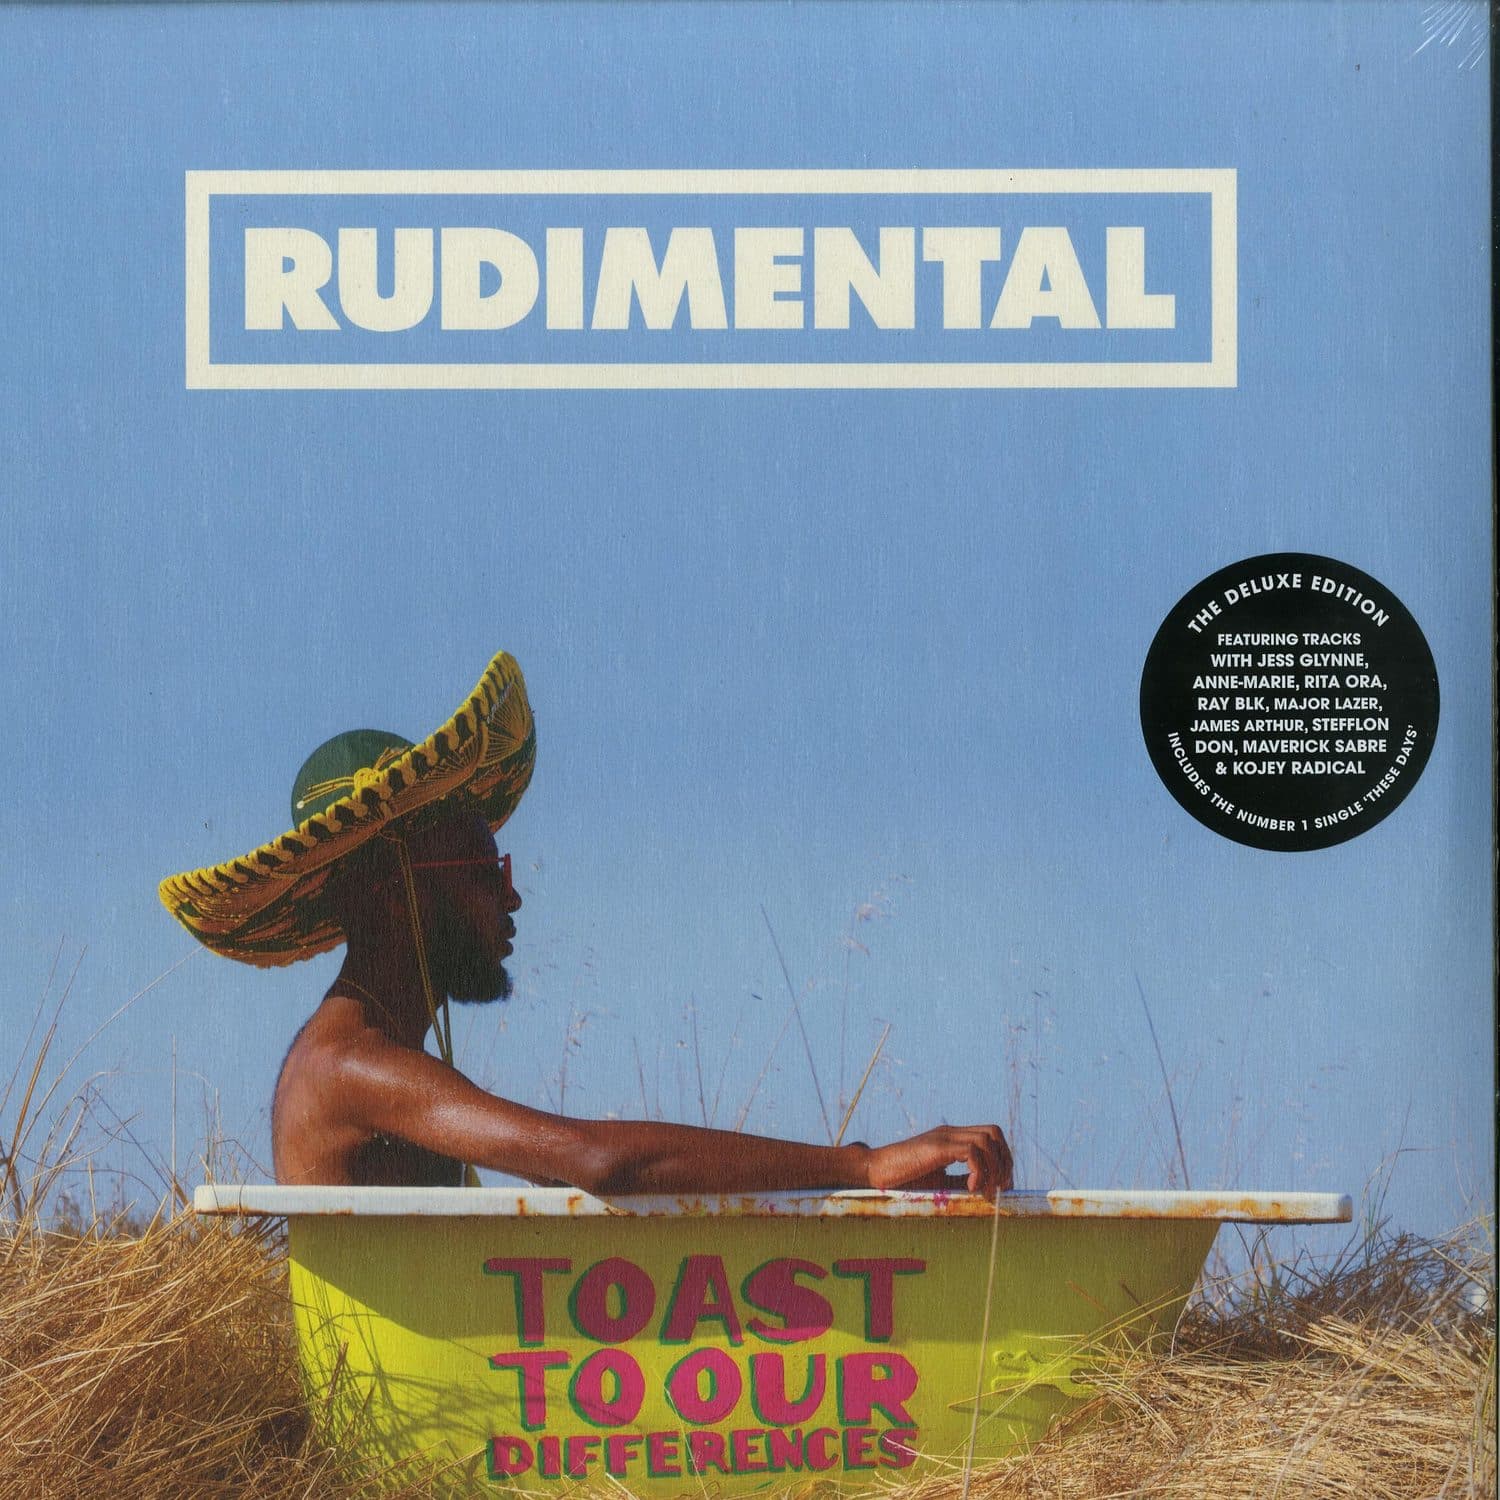 Rudimental - TOAST TO OUR DIFFERENCES 